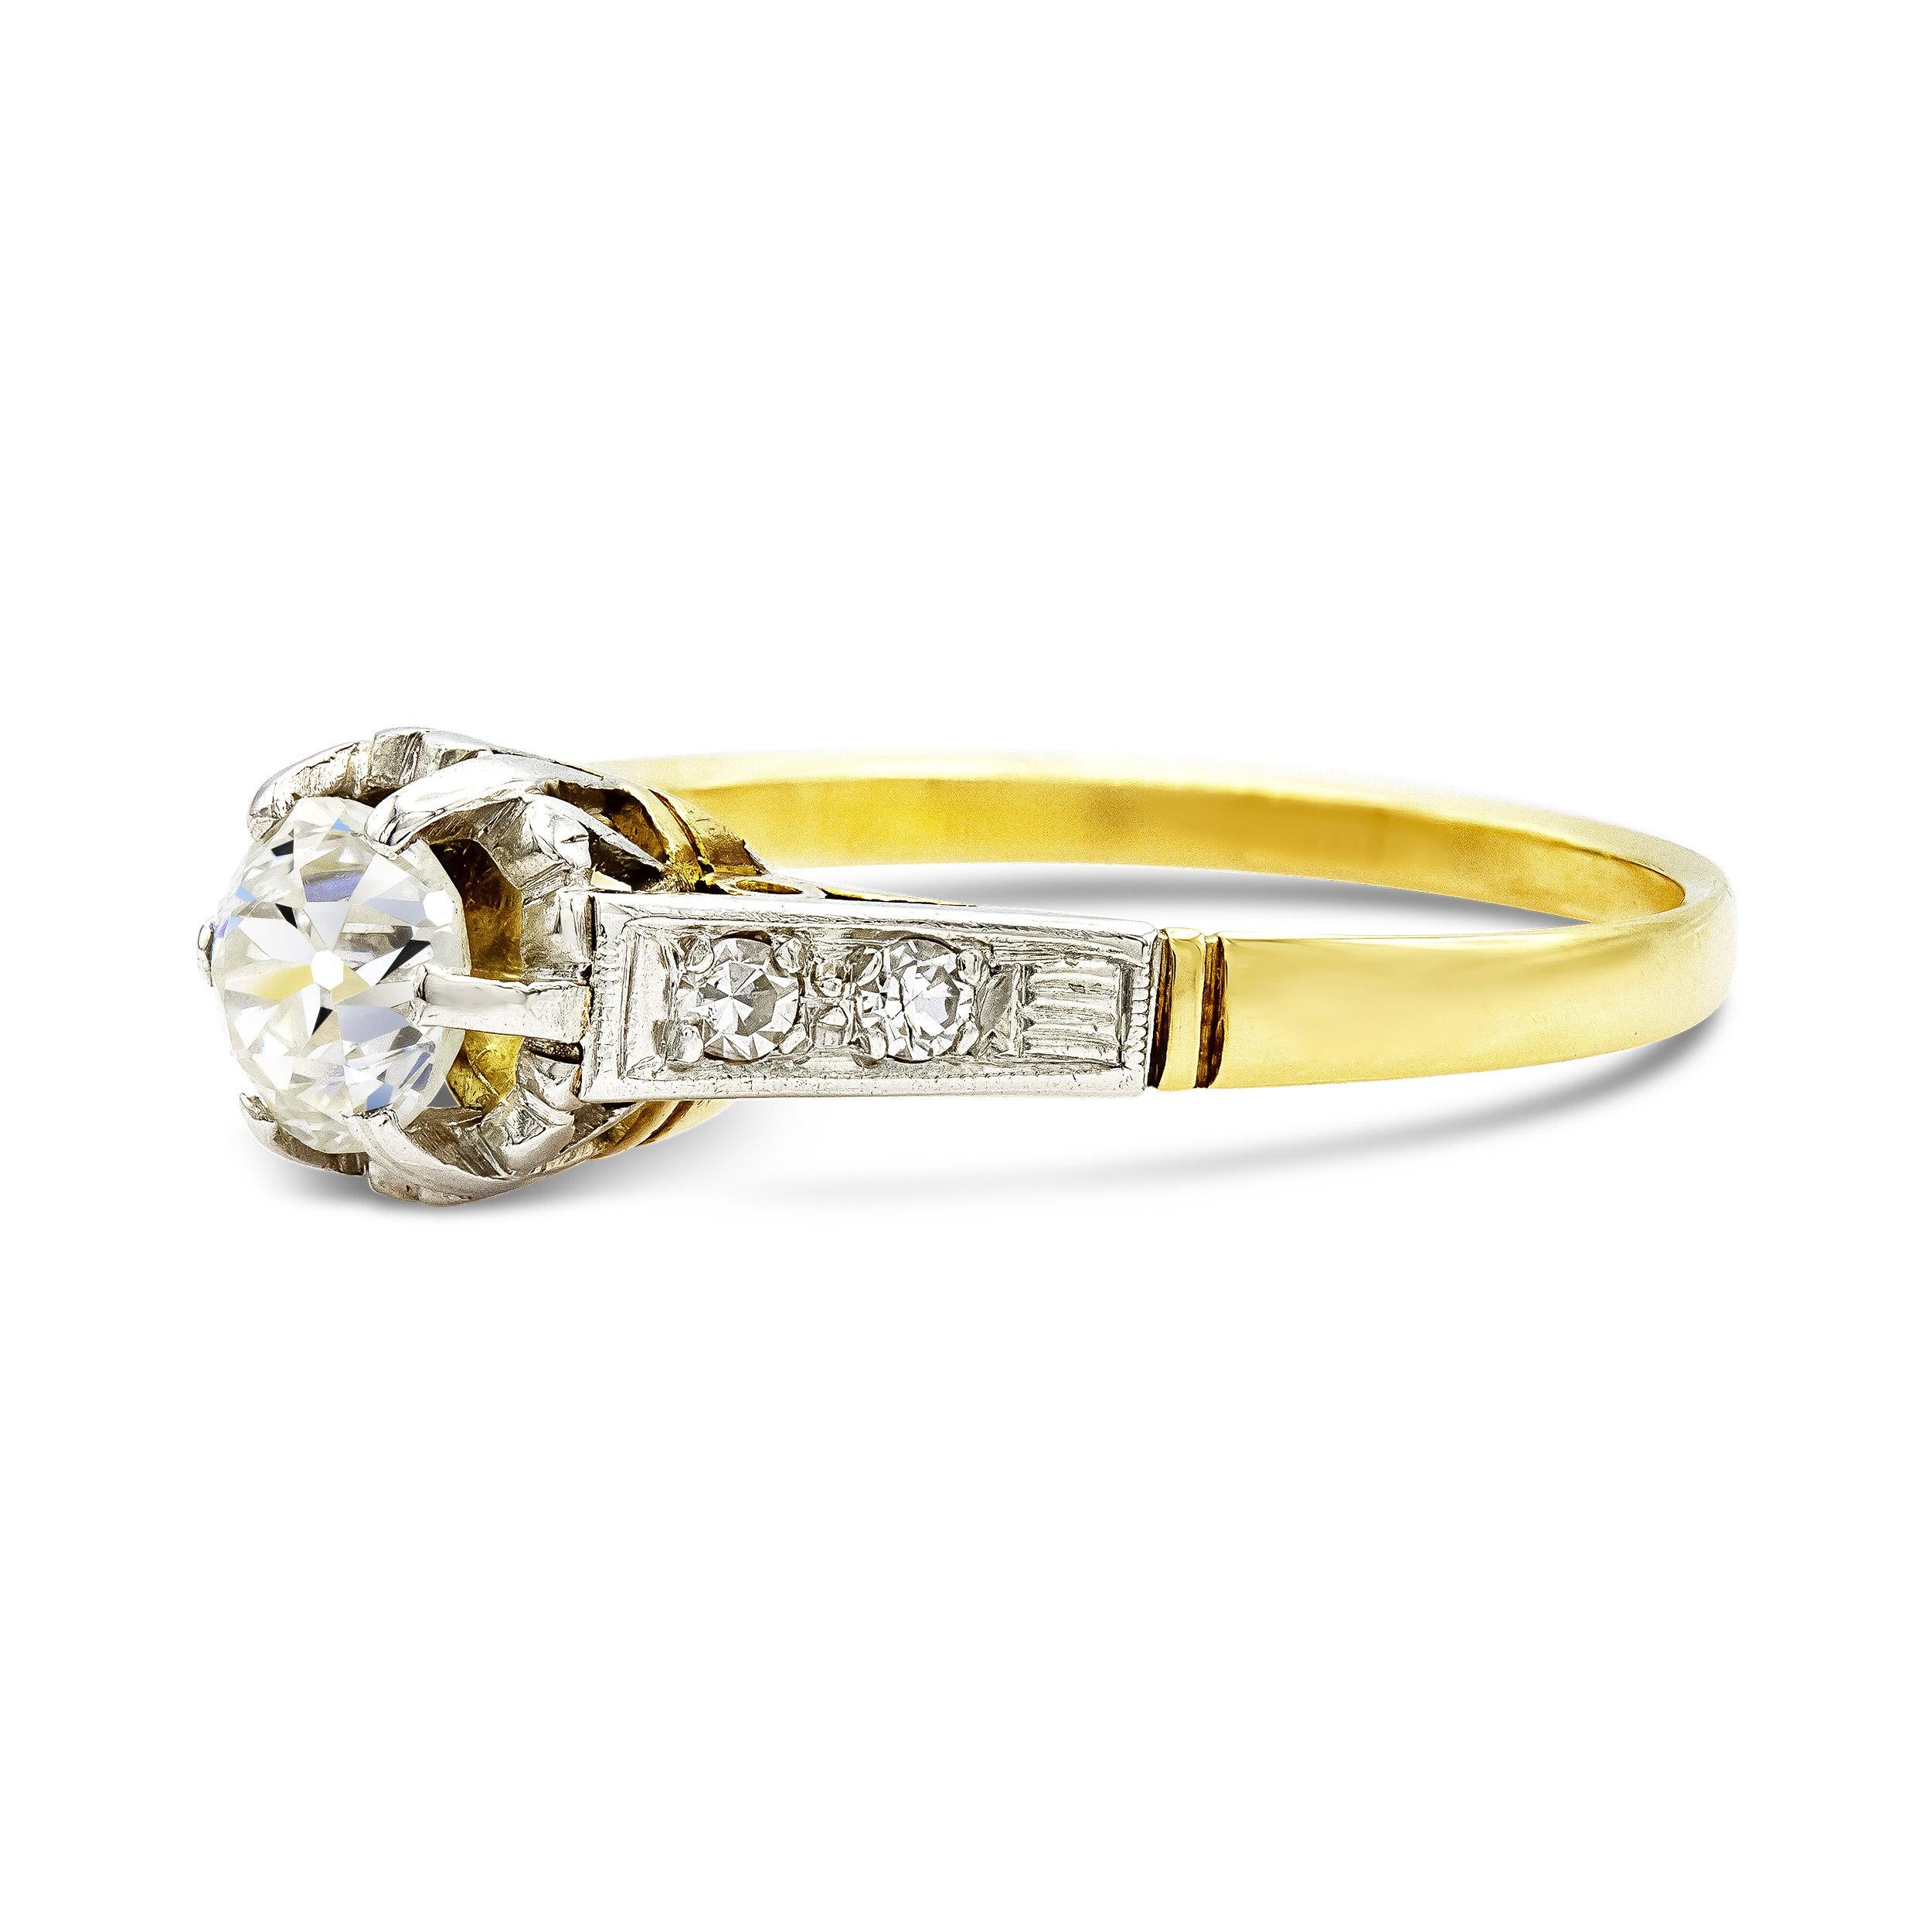 This antique engagement ring is romance personified. A buttercup setting holds a mesmerizing 0.67 ct. old European cut featuring a high crown and so much personality. With its diamond-studded shoulders and metalwork, this two-tone setting is a